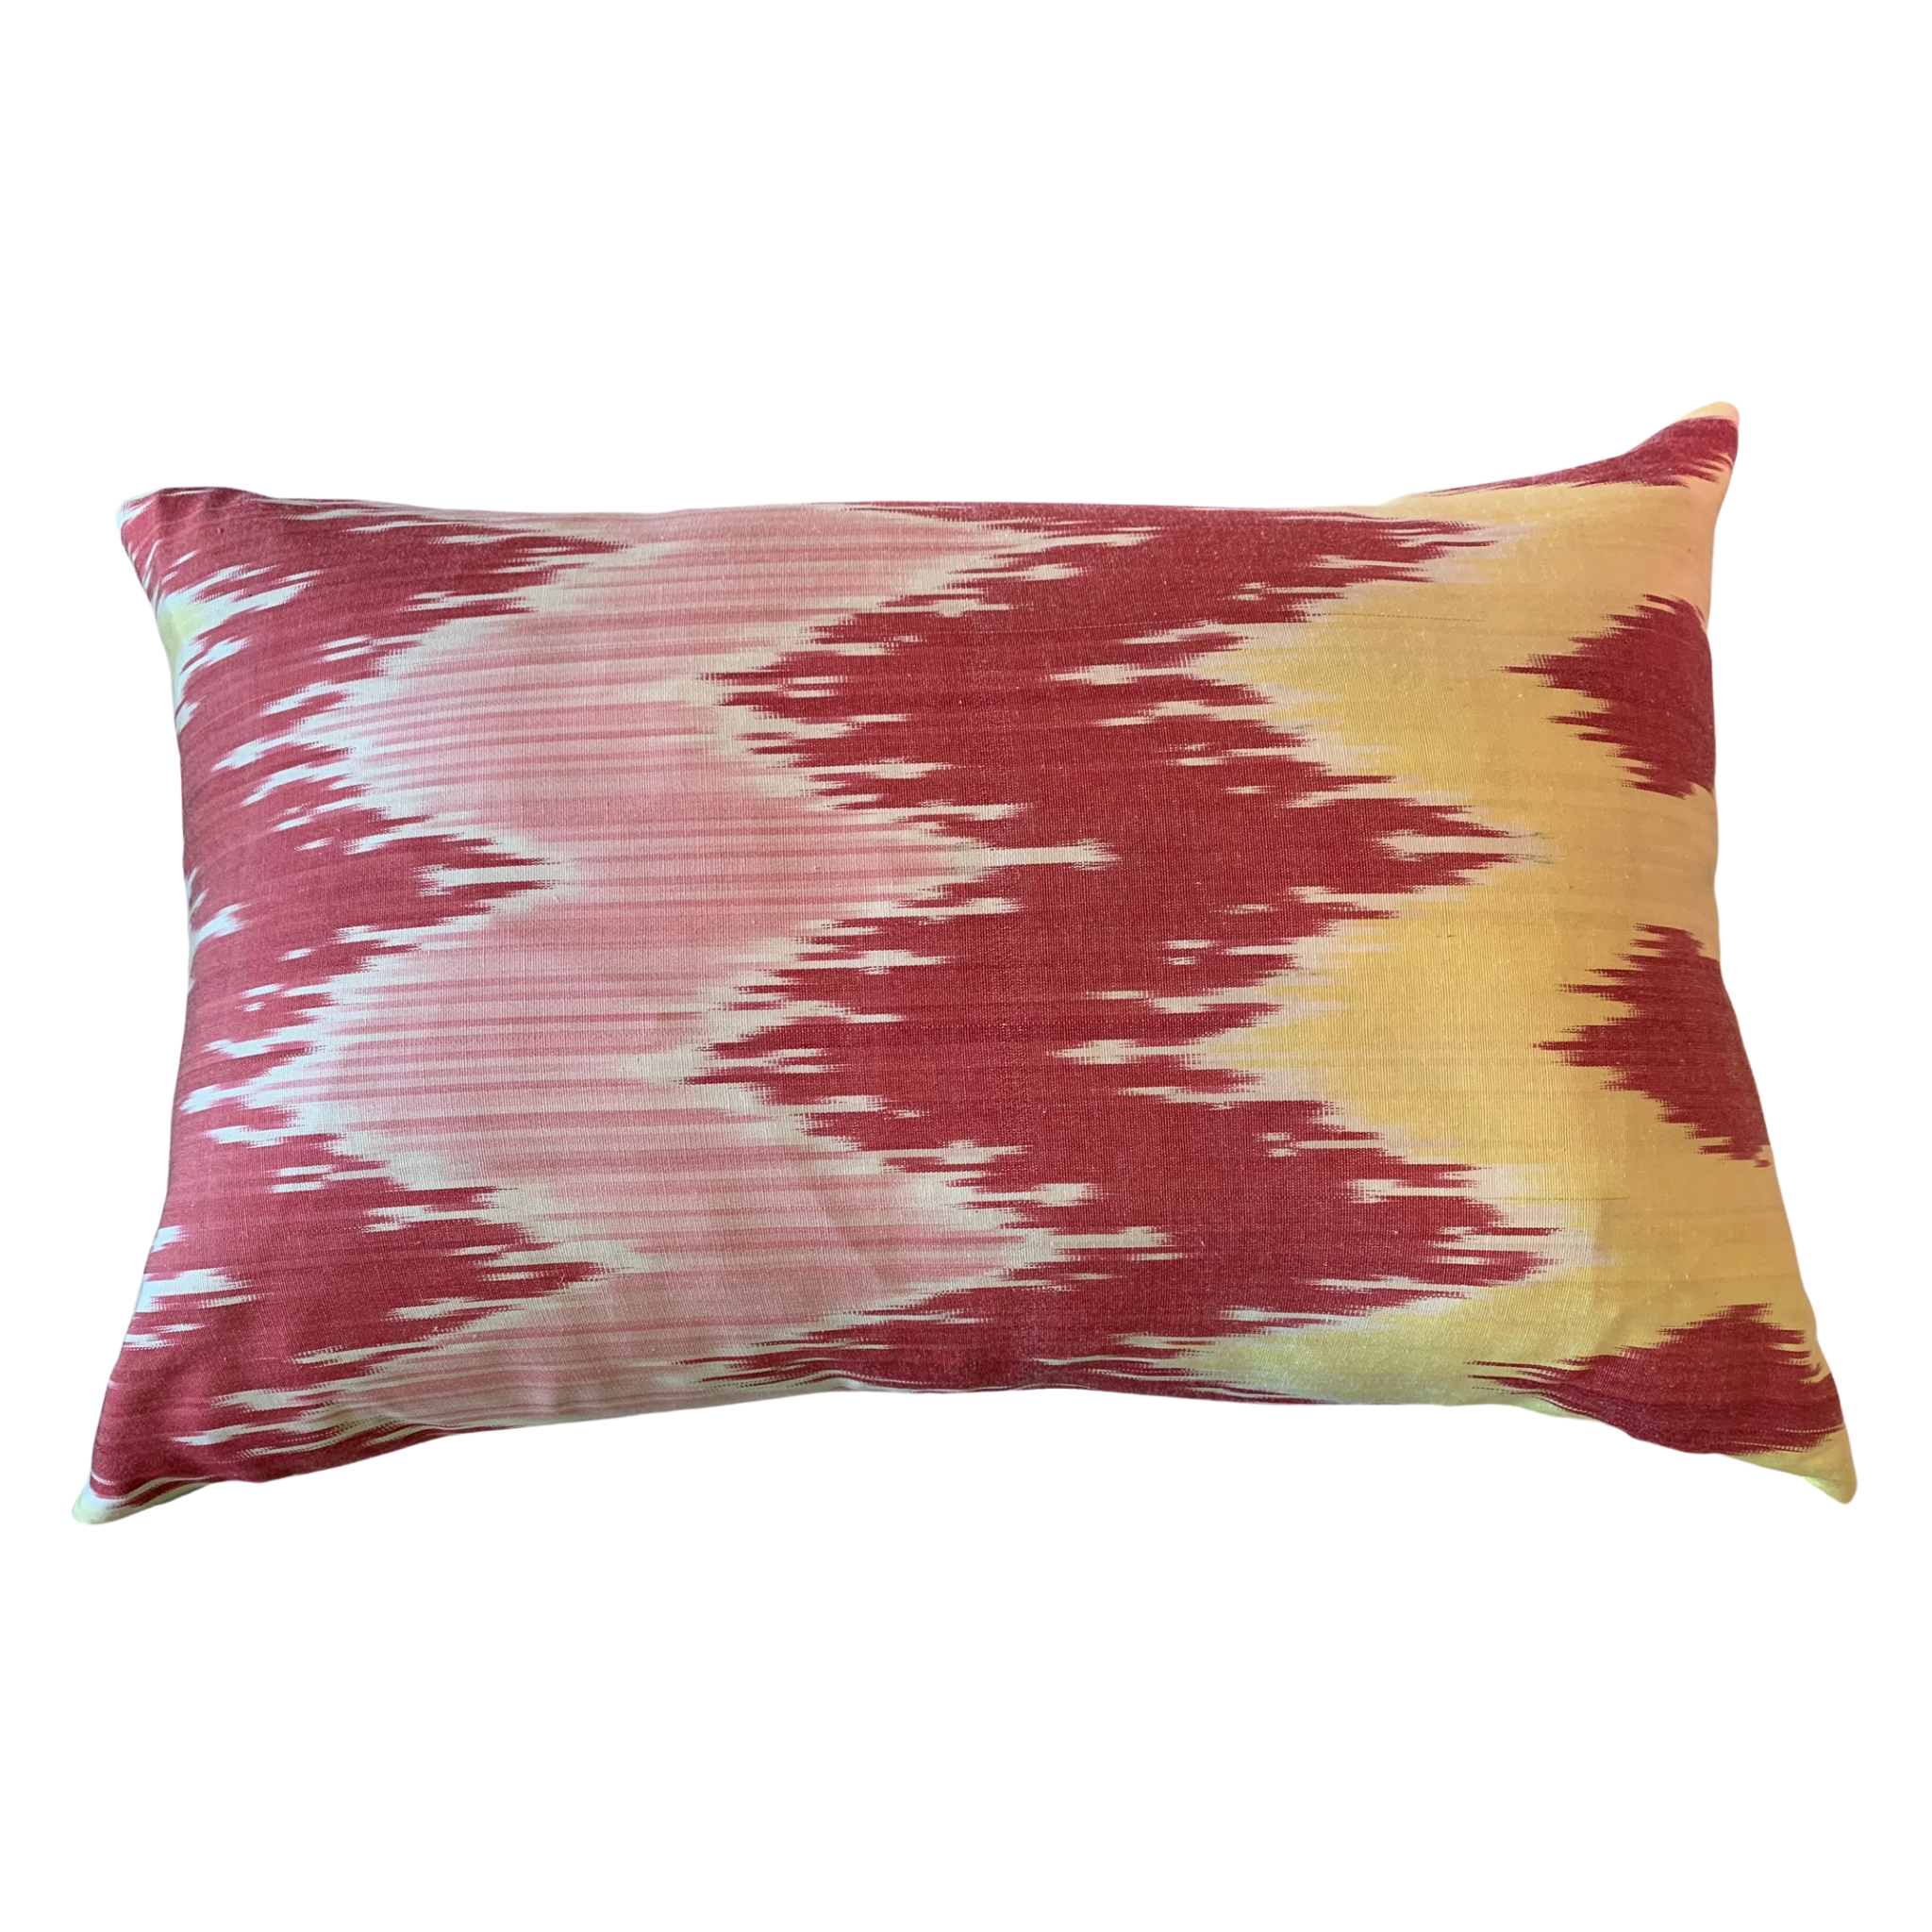 Ikat Pillow with Down Insert- Pink and Yellow